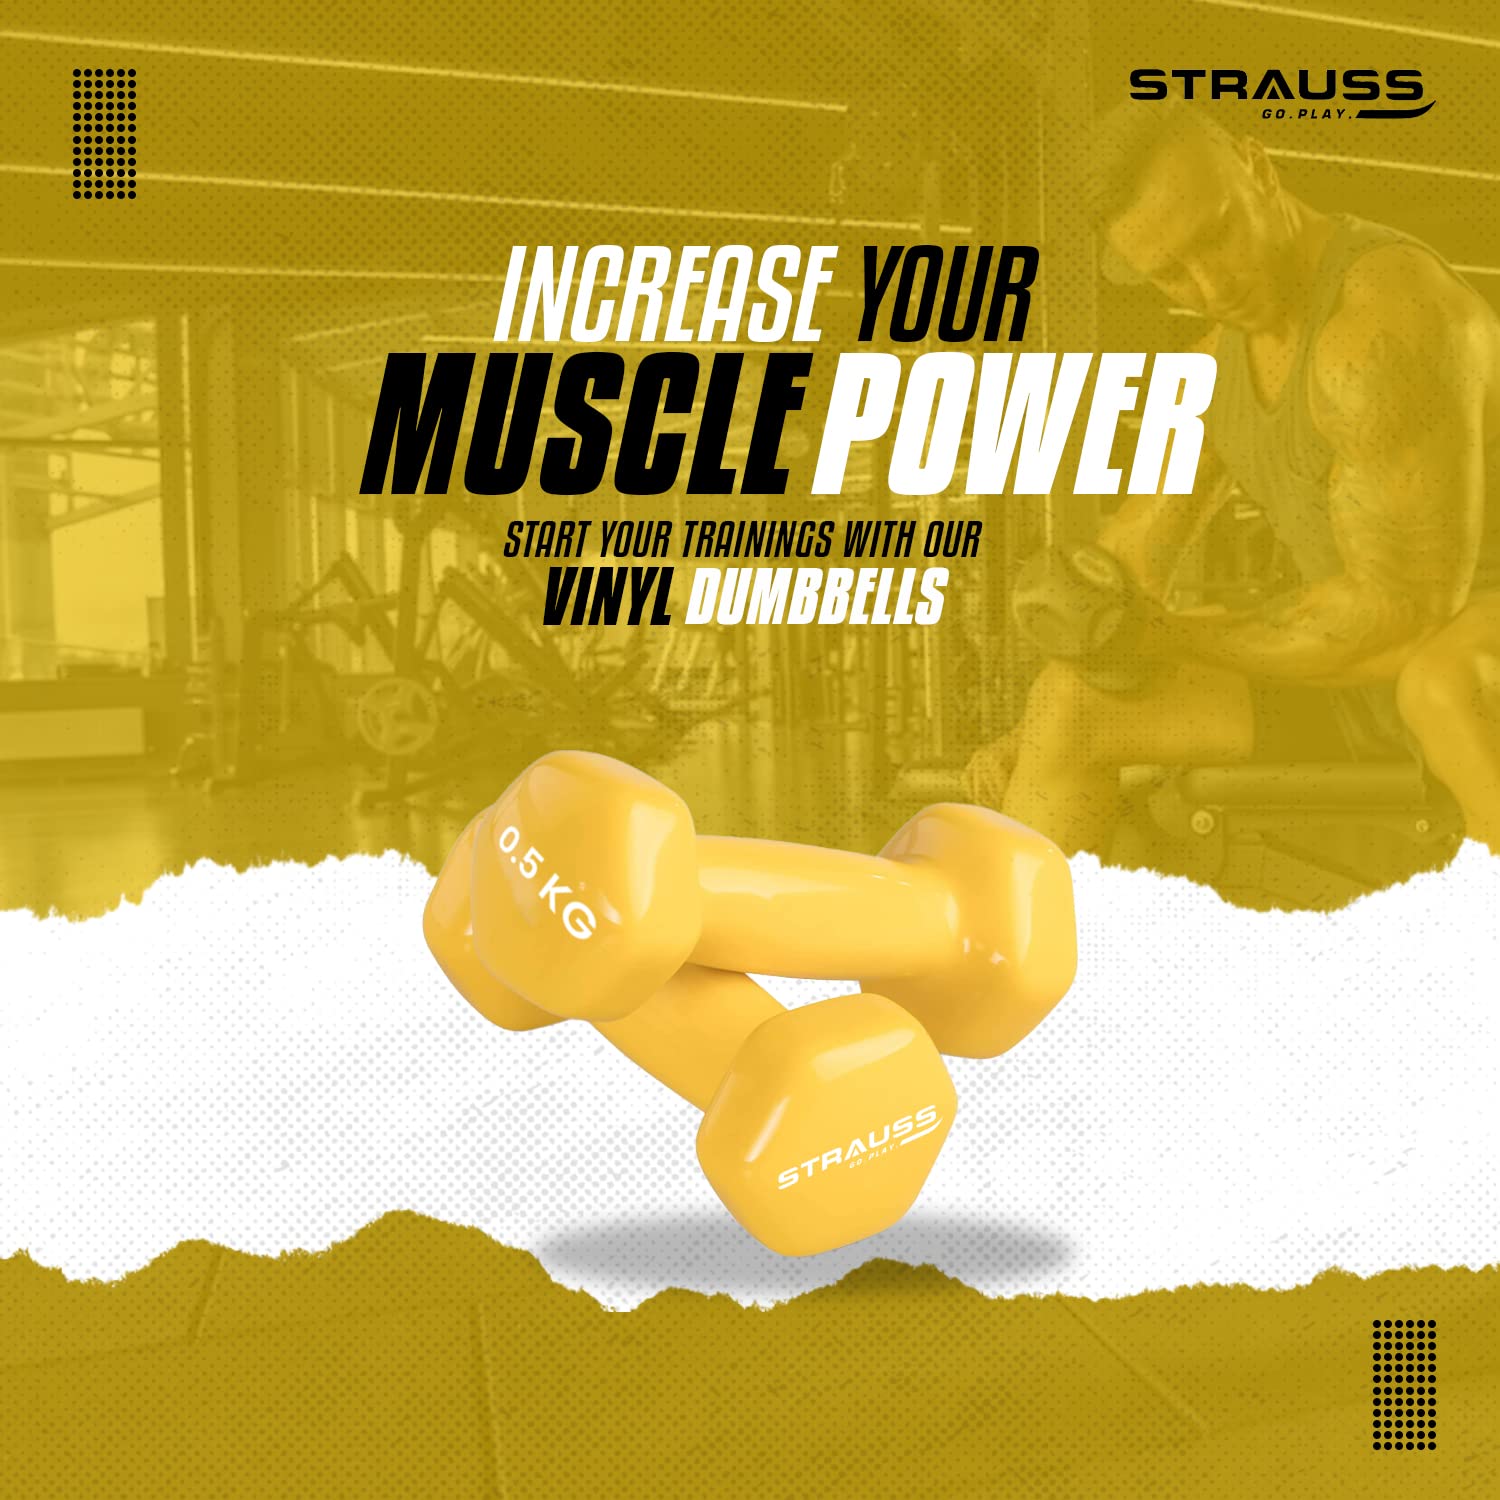 Strauss Premium Vinyl Dumbbells Weight for Men & Women | 0.5 Kg (Each) | 1 Kg (Pair) | Ideal for Home Workout, Yoga, Pilates, Gym Exercises | Non-Slip, Easy to Hold, Scratch Resistant (Yellow)